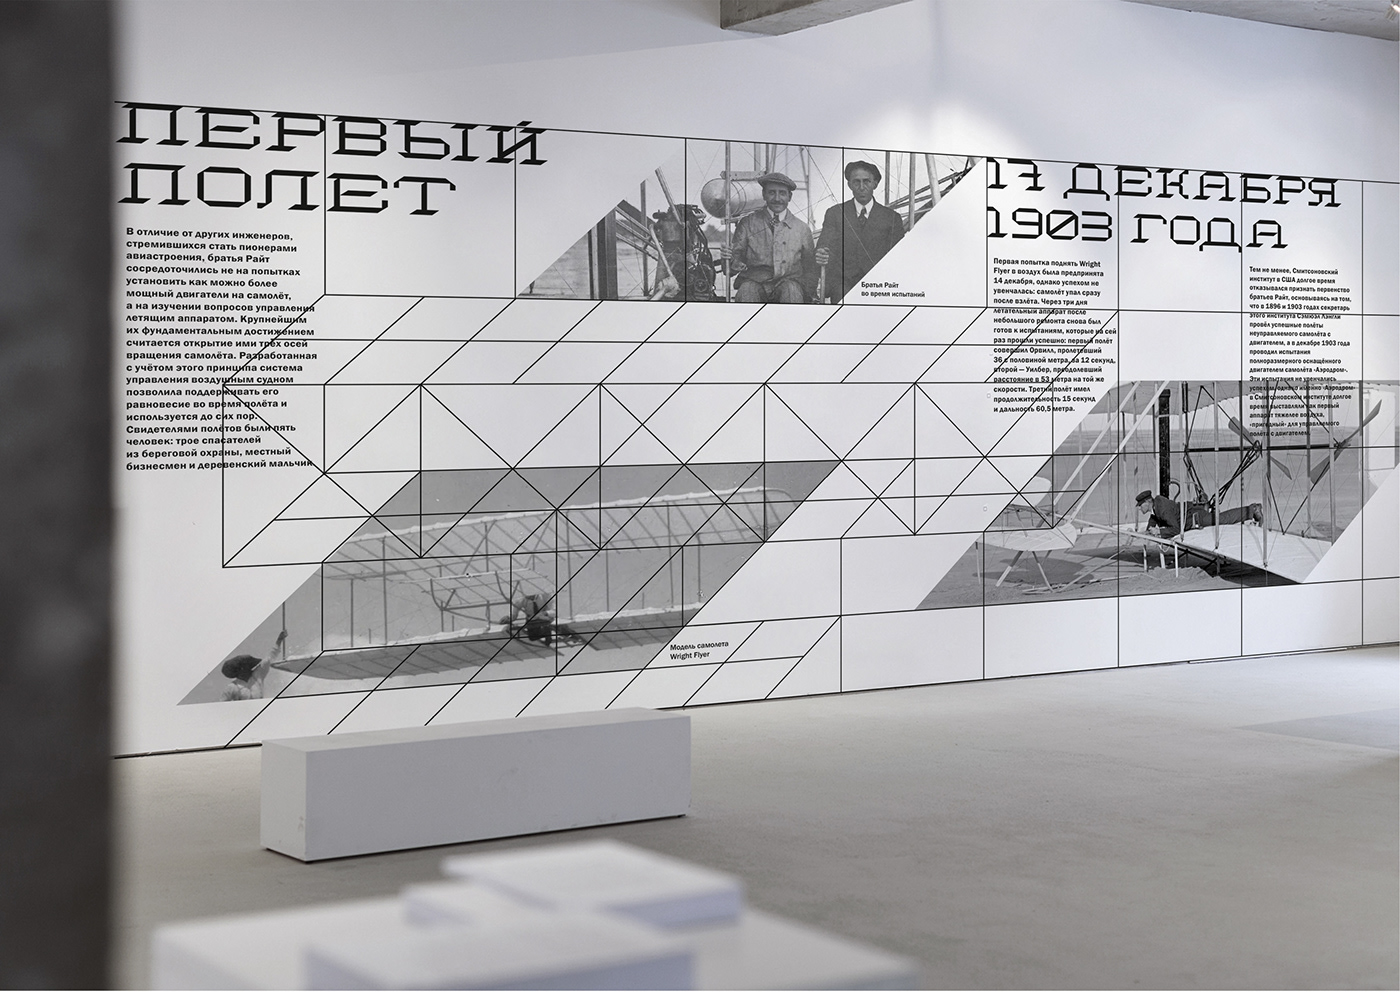 identity Exhibition  typography   Typeface Display aviation Wright Brothers flight history Technology